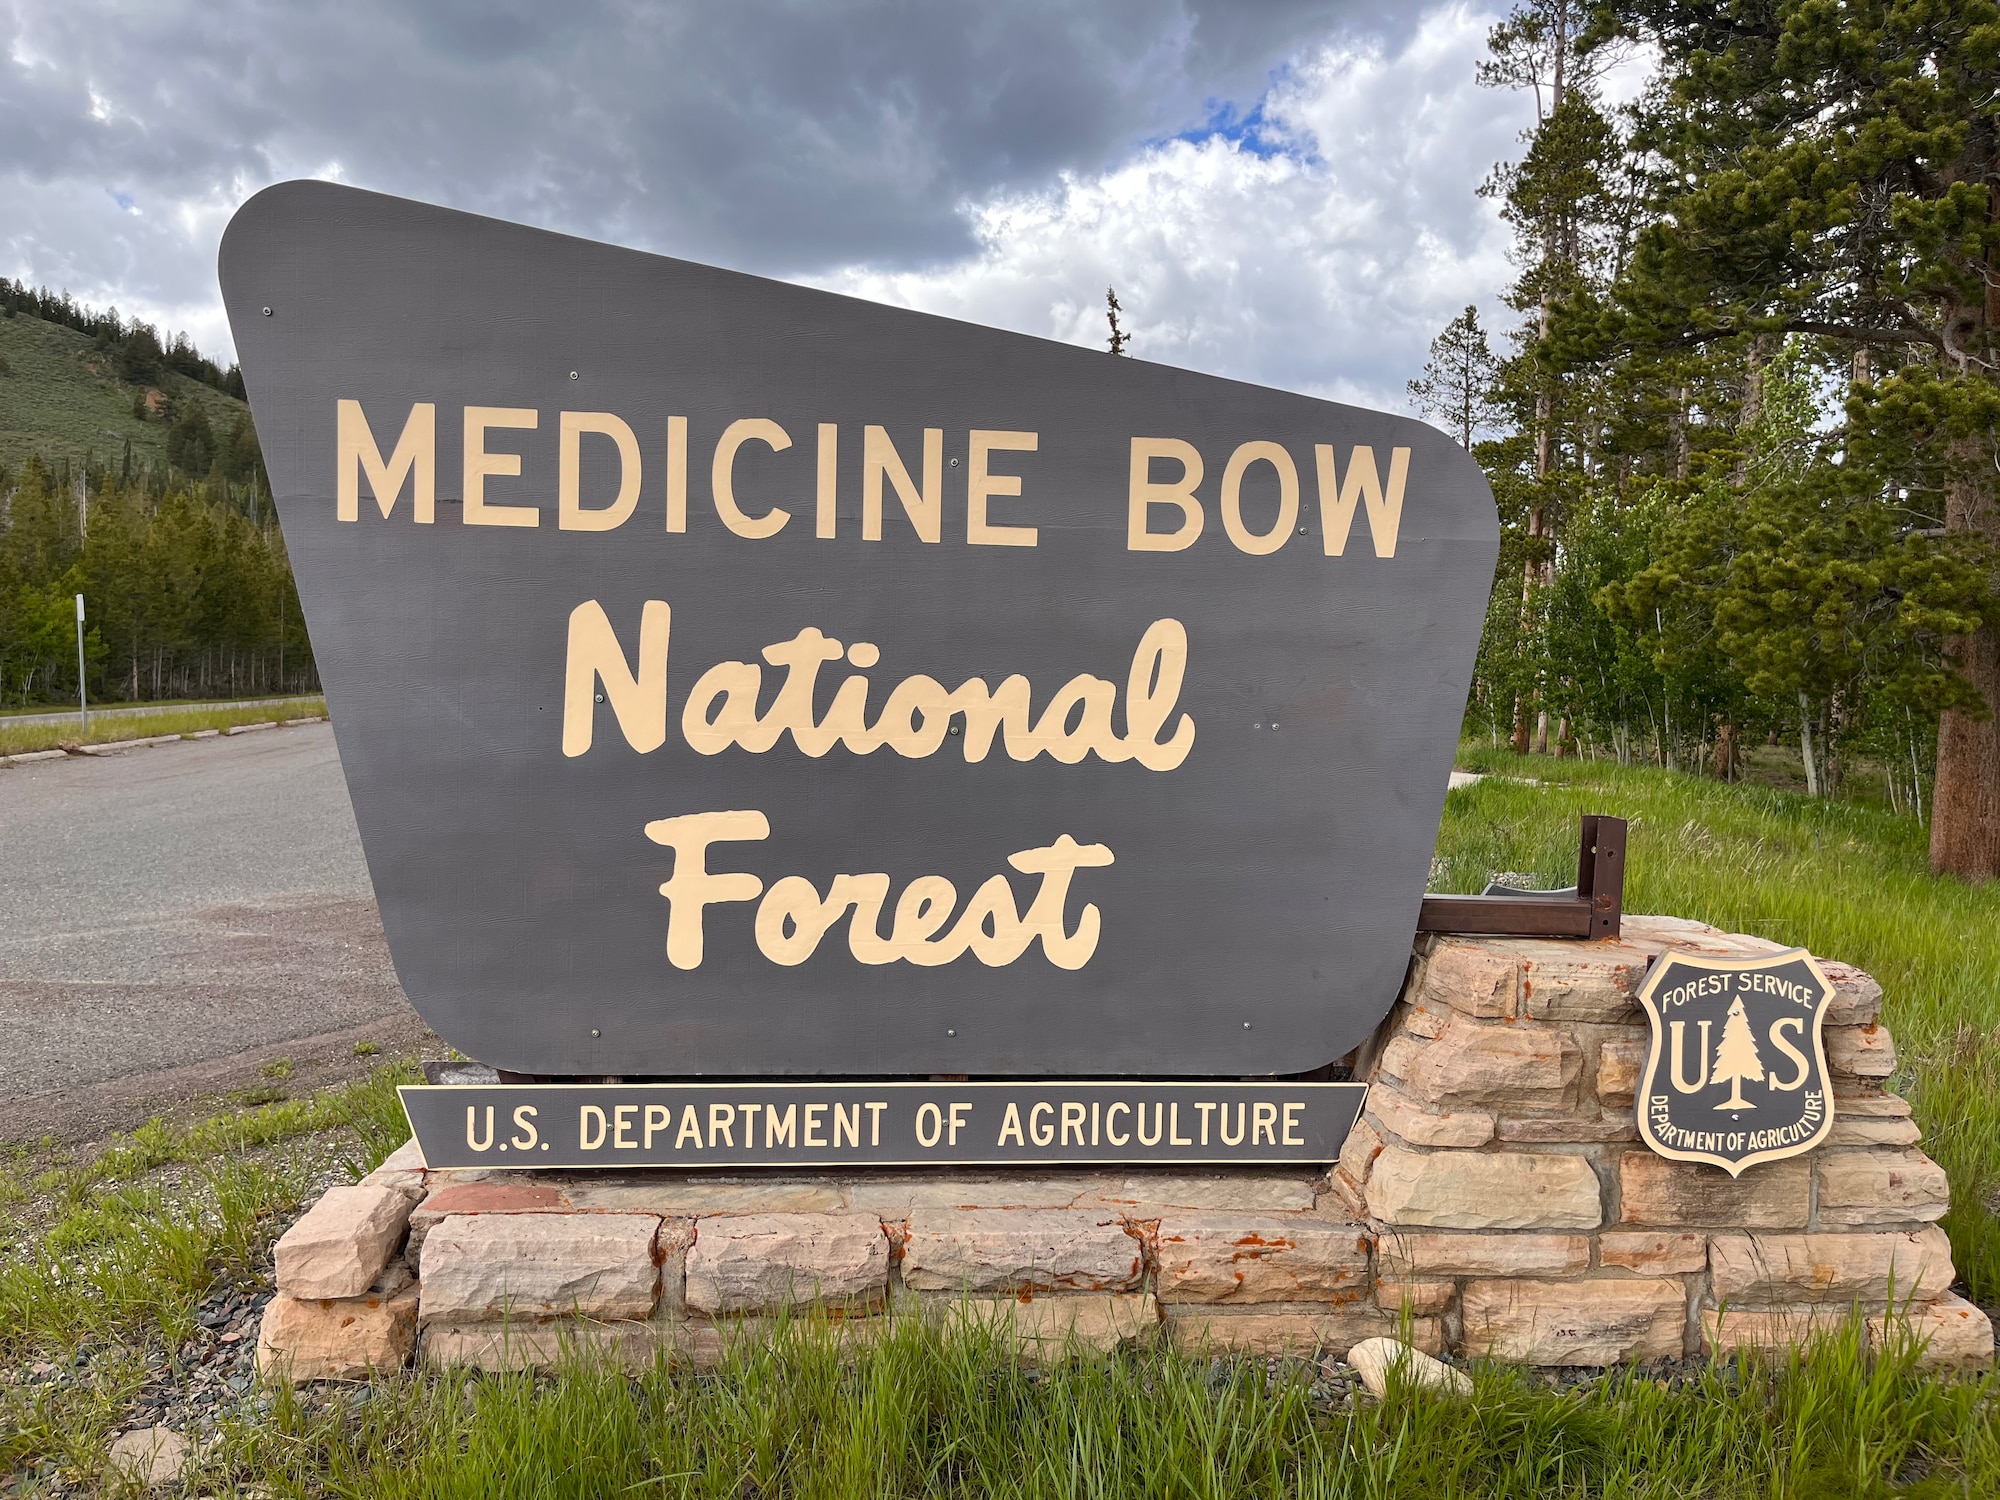 The entrance sign to Medicine Bow National Forest